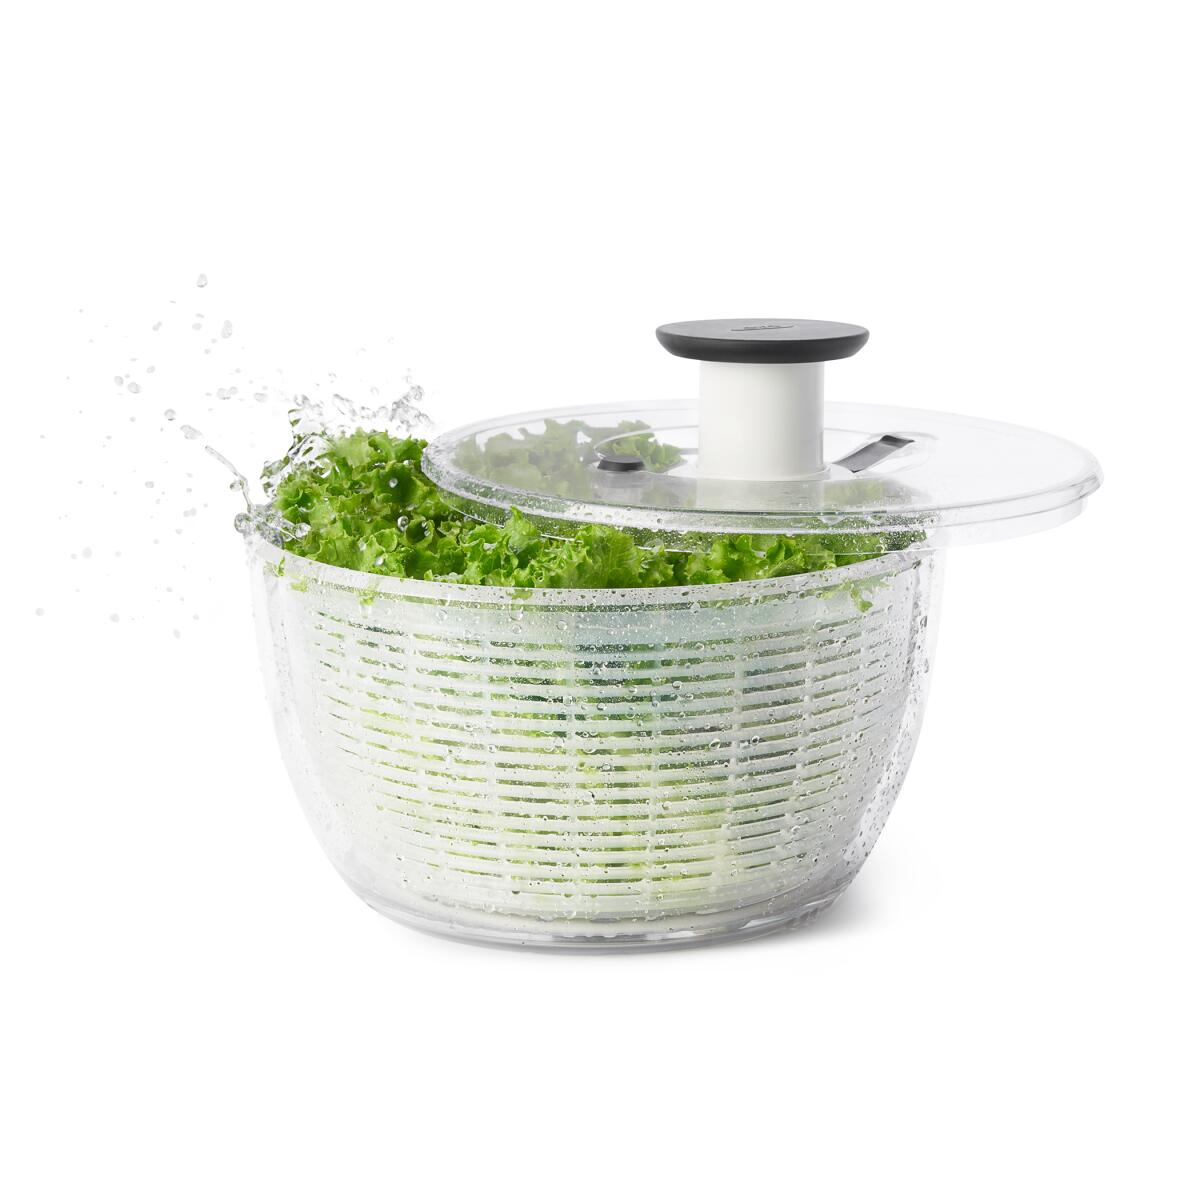 OXO Steel Salad Spinner Review: A Must-Have Kitchen Tool